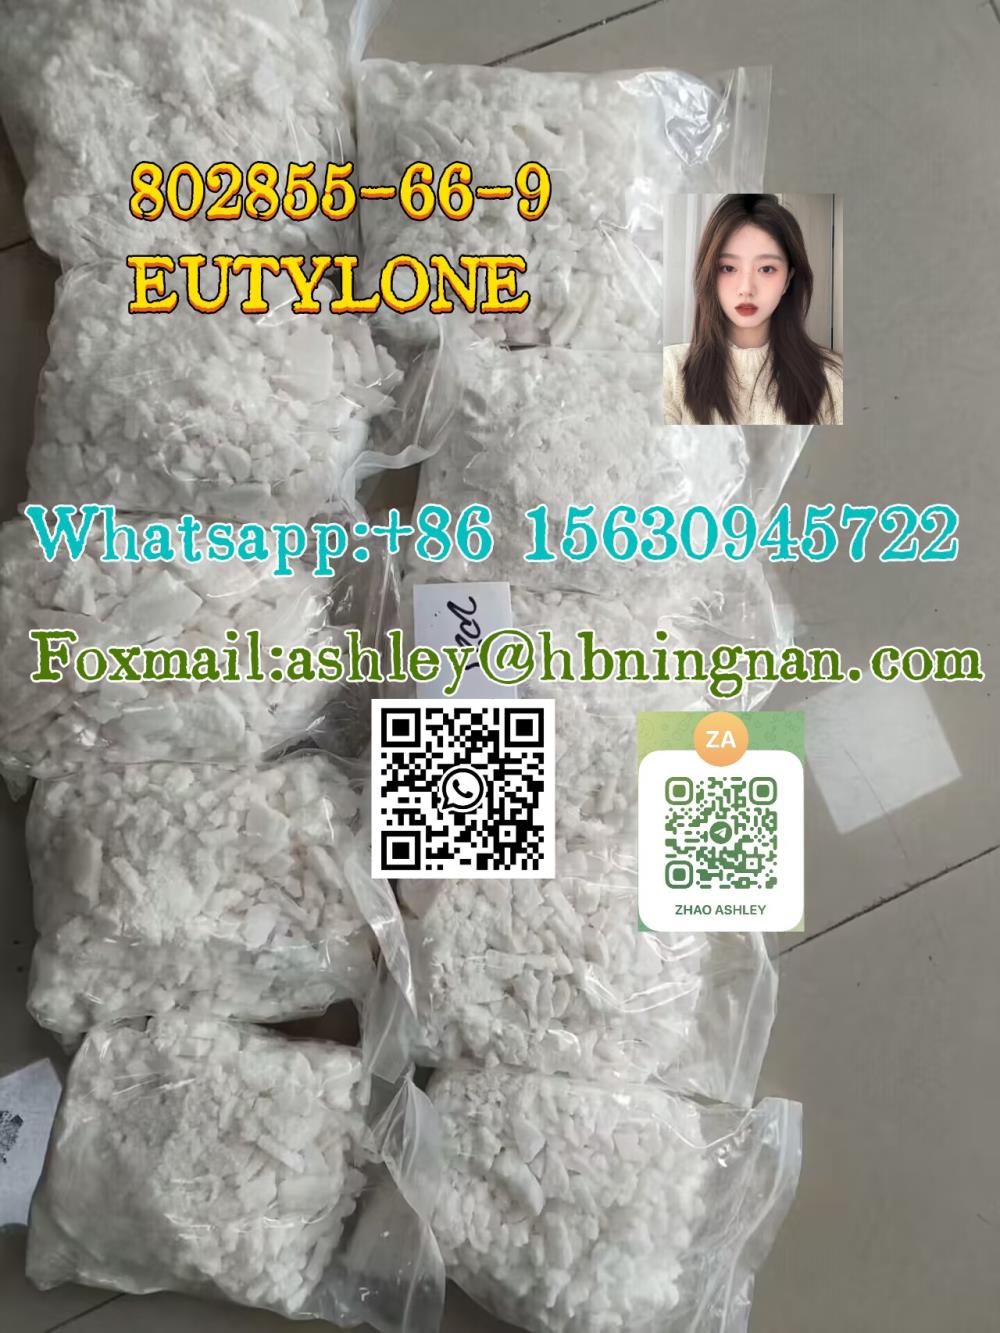 cas 802855-66-9 EUTYLONE in stock hot to sale ,802855-66-9 EUTYLONE,ningnan,Construction and Decoration/Building Materials Agents